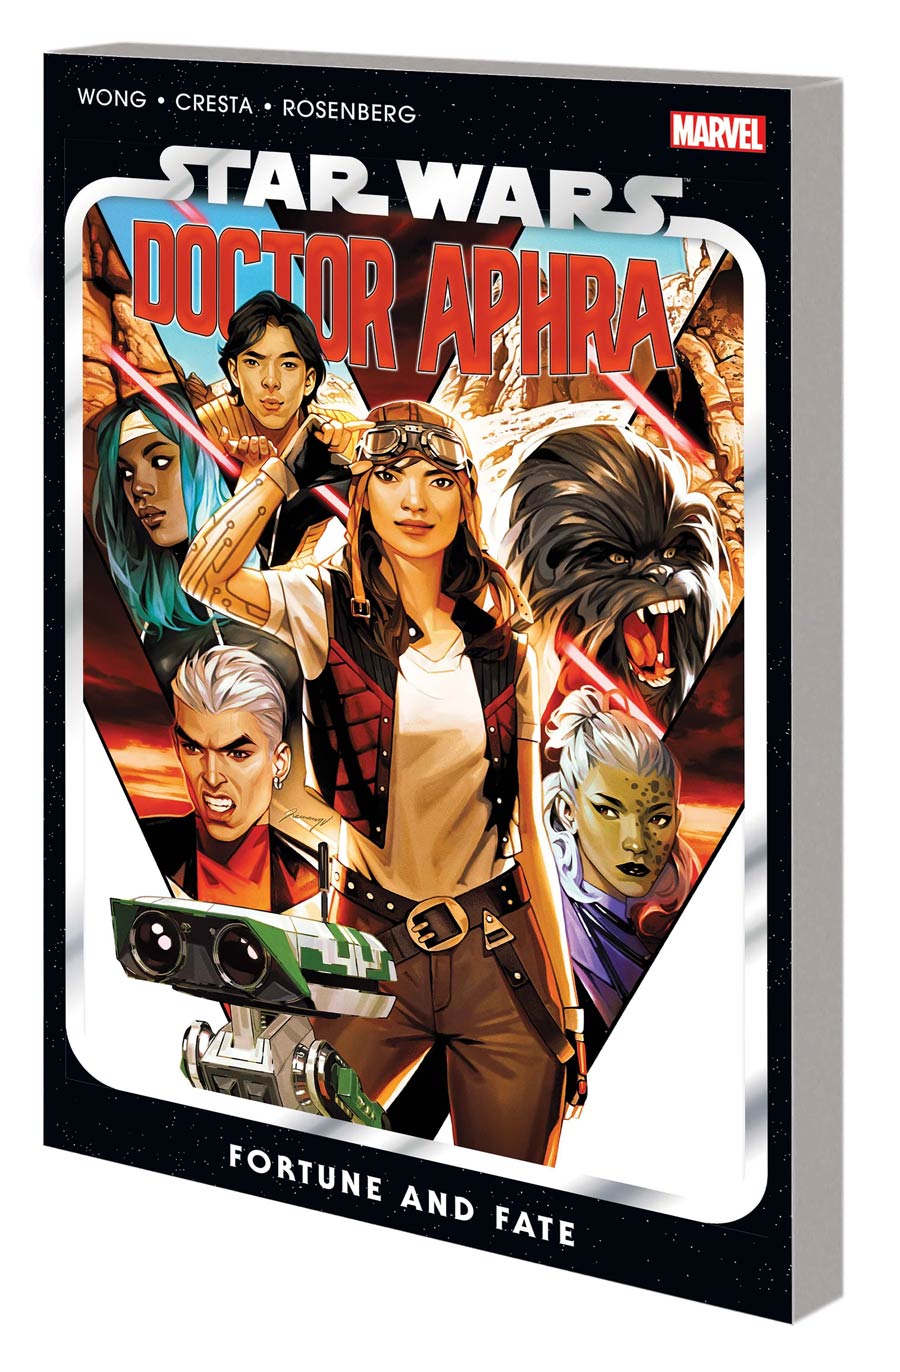 Star Wars Doctor Aphra (2020) Vol 1 Fortune And Fate TP